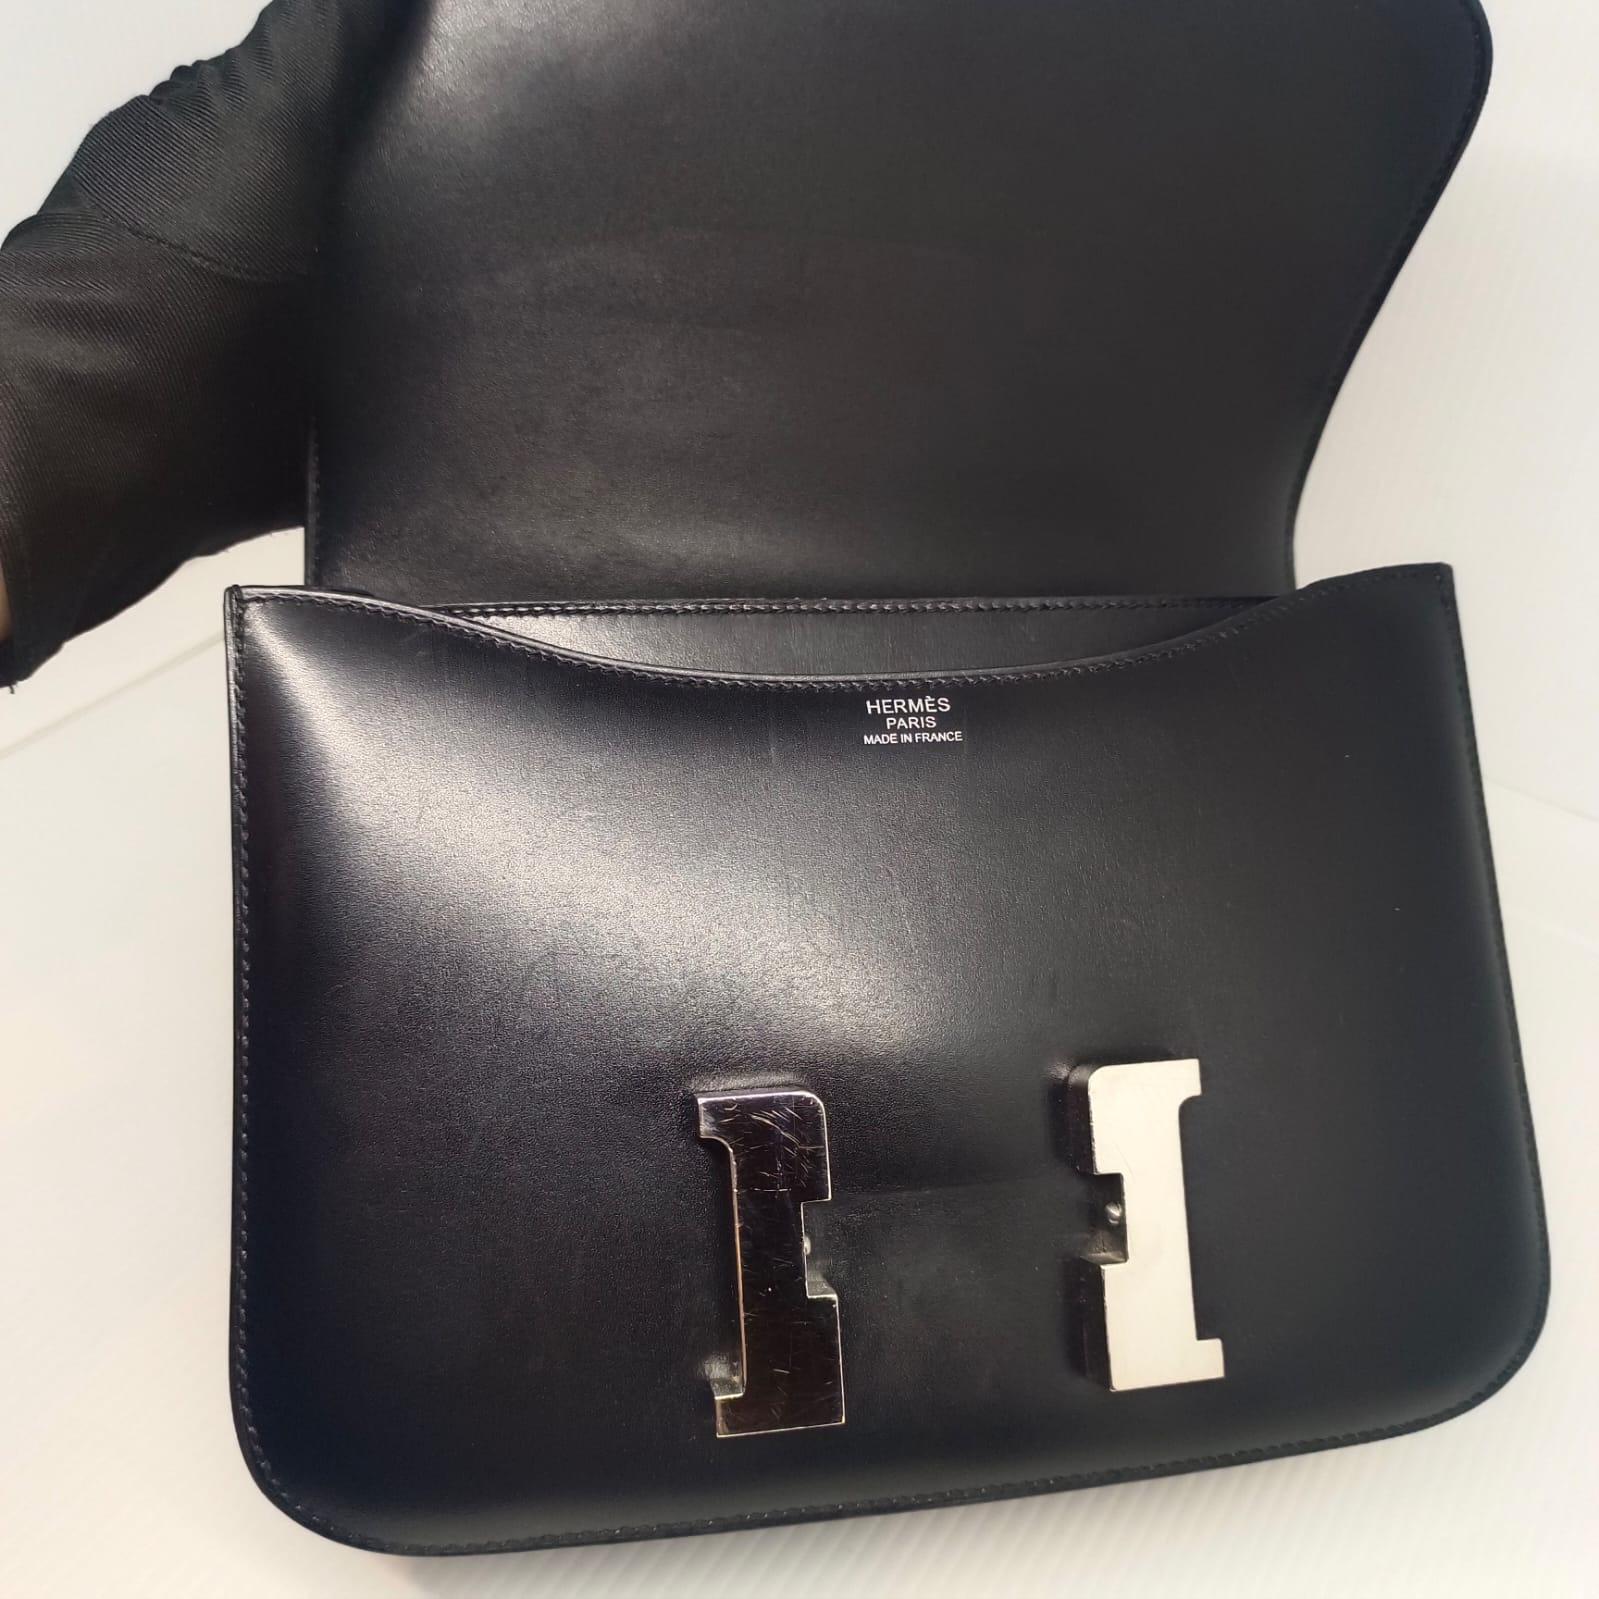 Classic constance 24 in black box leather with palladium hardware. Perfect for everyday bag. Slight scratches on the box leather. Hardware shows quiet significant scratch marks. Faint dirt marks on the lining. Stamp square o (2011). Bag only.